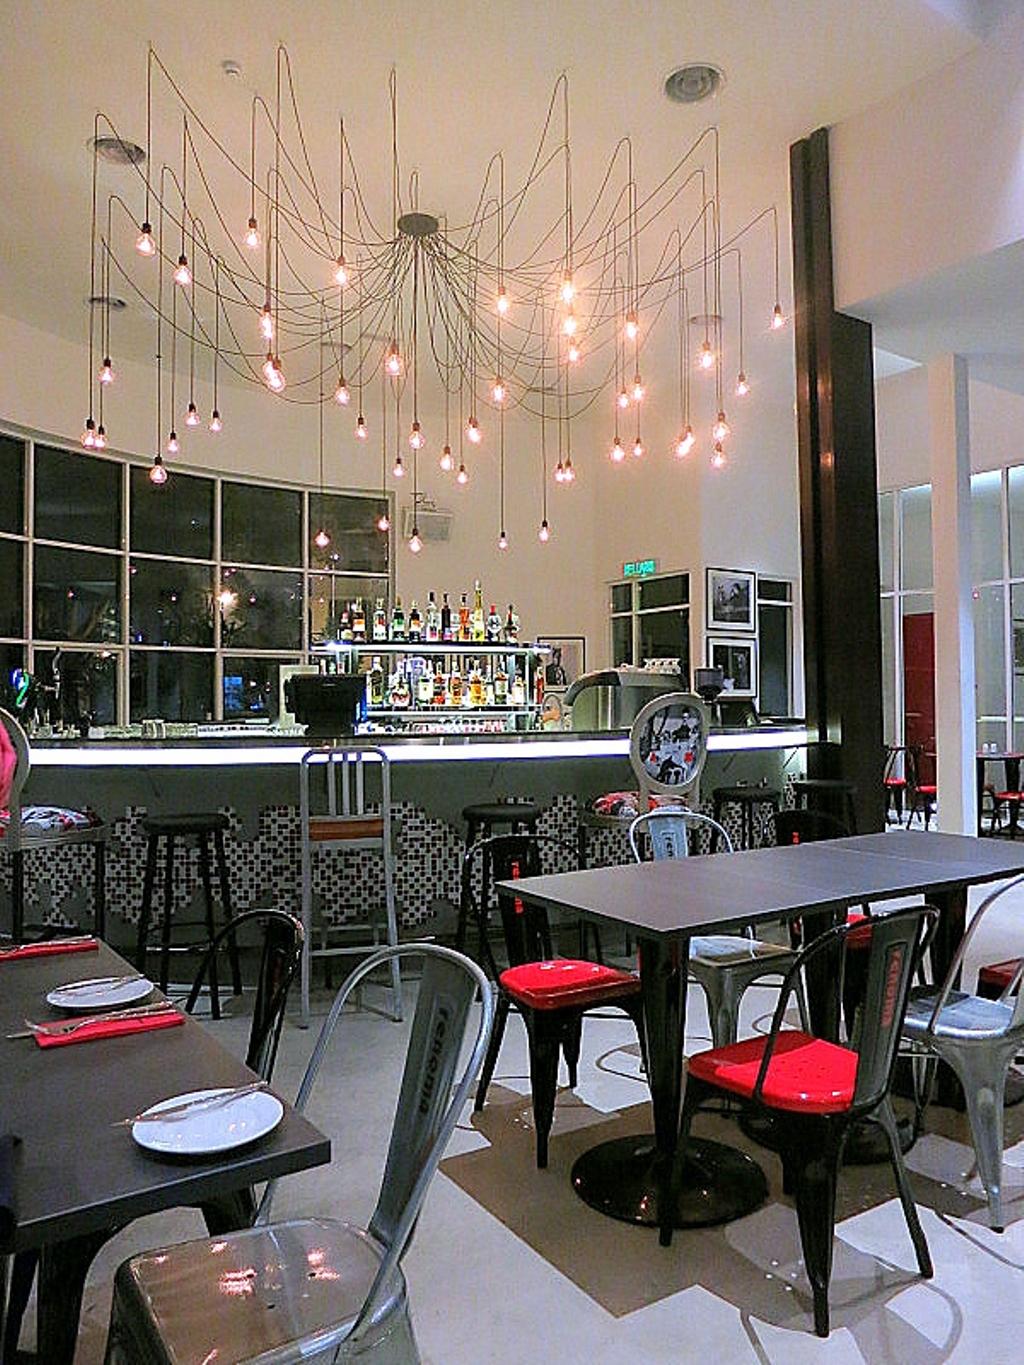 Renoma Cafe KL, Commercial, Architect, Aamer Architects, Contemporary, Hanging Lights, High Ceiling, White Flooring, Red Chair, Black Chair, Aluminium Chair, Dining Table, White Floor, White Ceiling, White Walls, Glass Window, Tall Window, High Window, Bar Counter, High Stools, High Chair, Cafe, Restaurant, Automobile, Car, Transportation, Vehicle